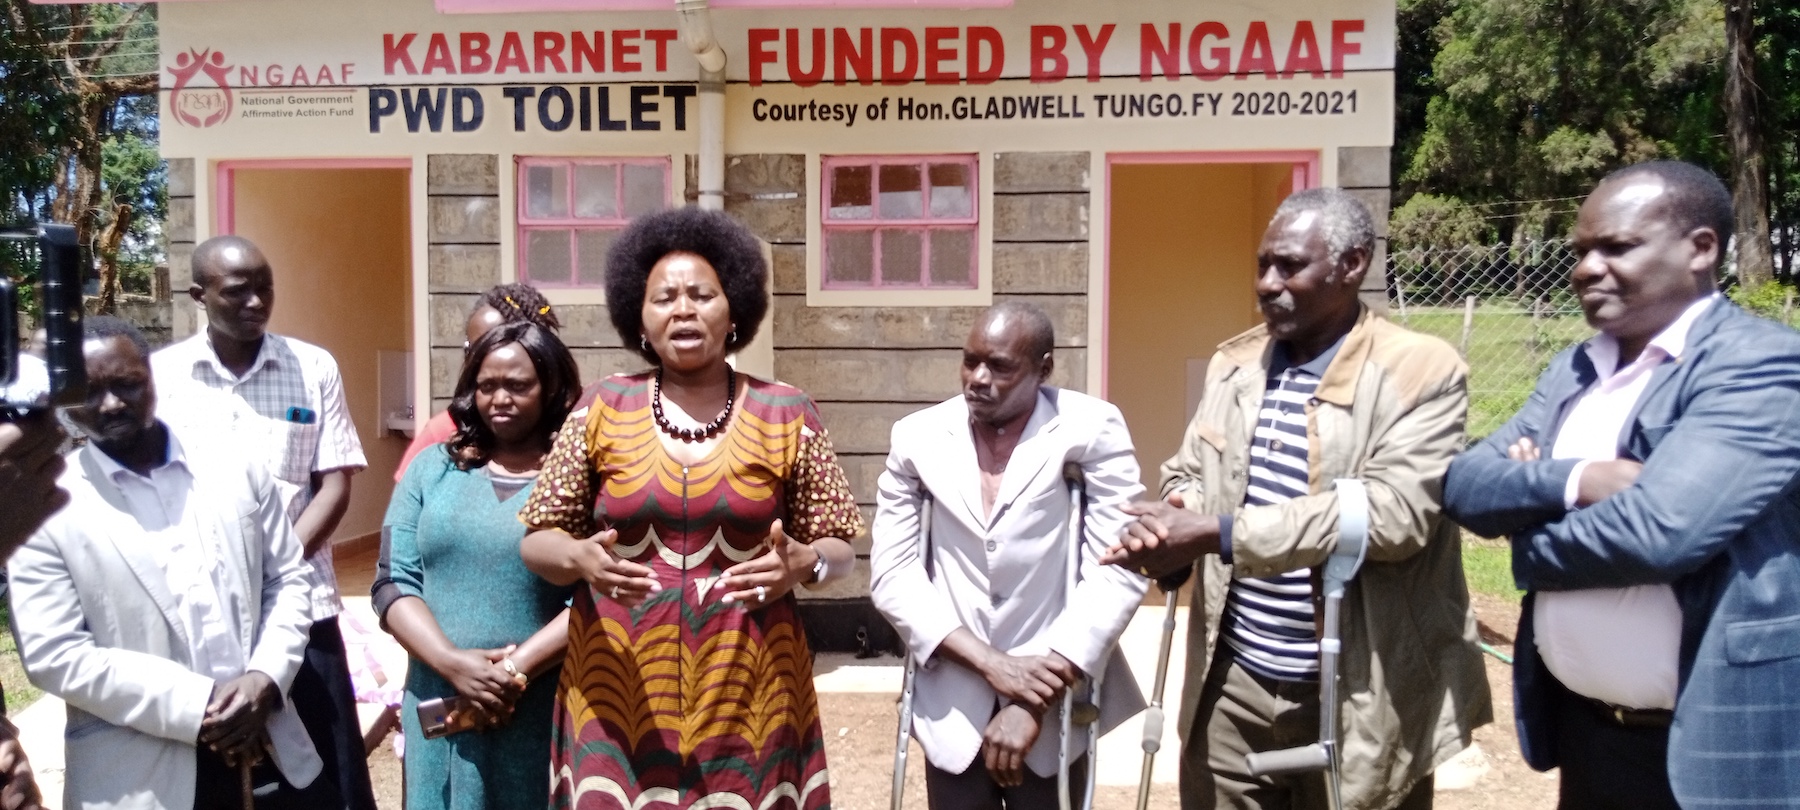 Baringo PWDs elated to have a modern accessible sanitation facility